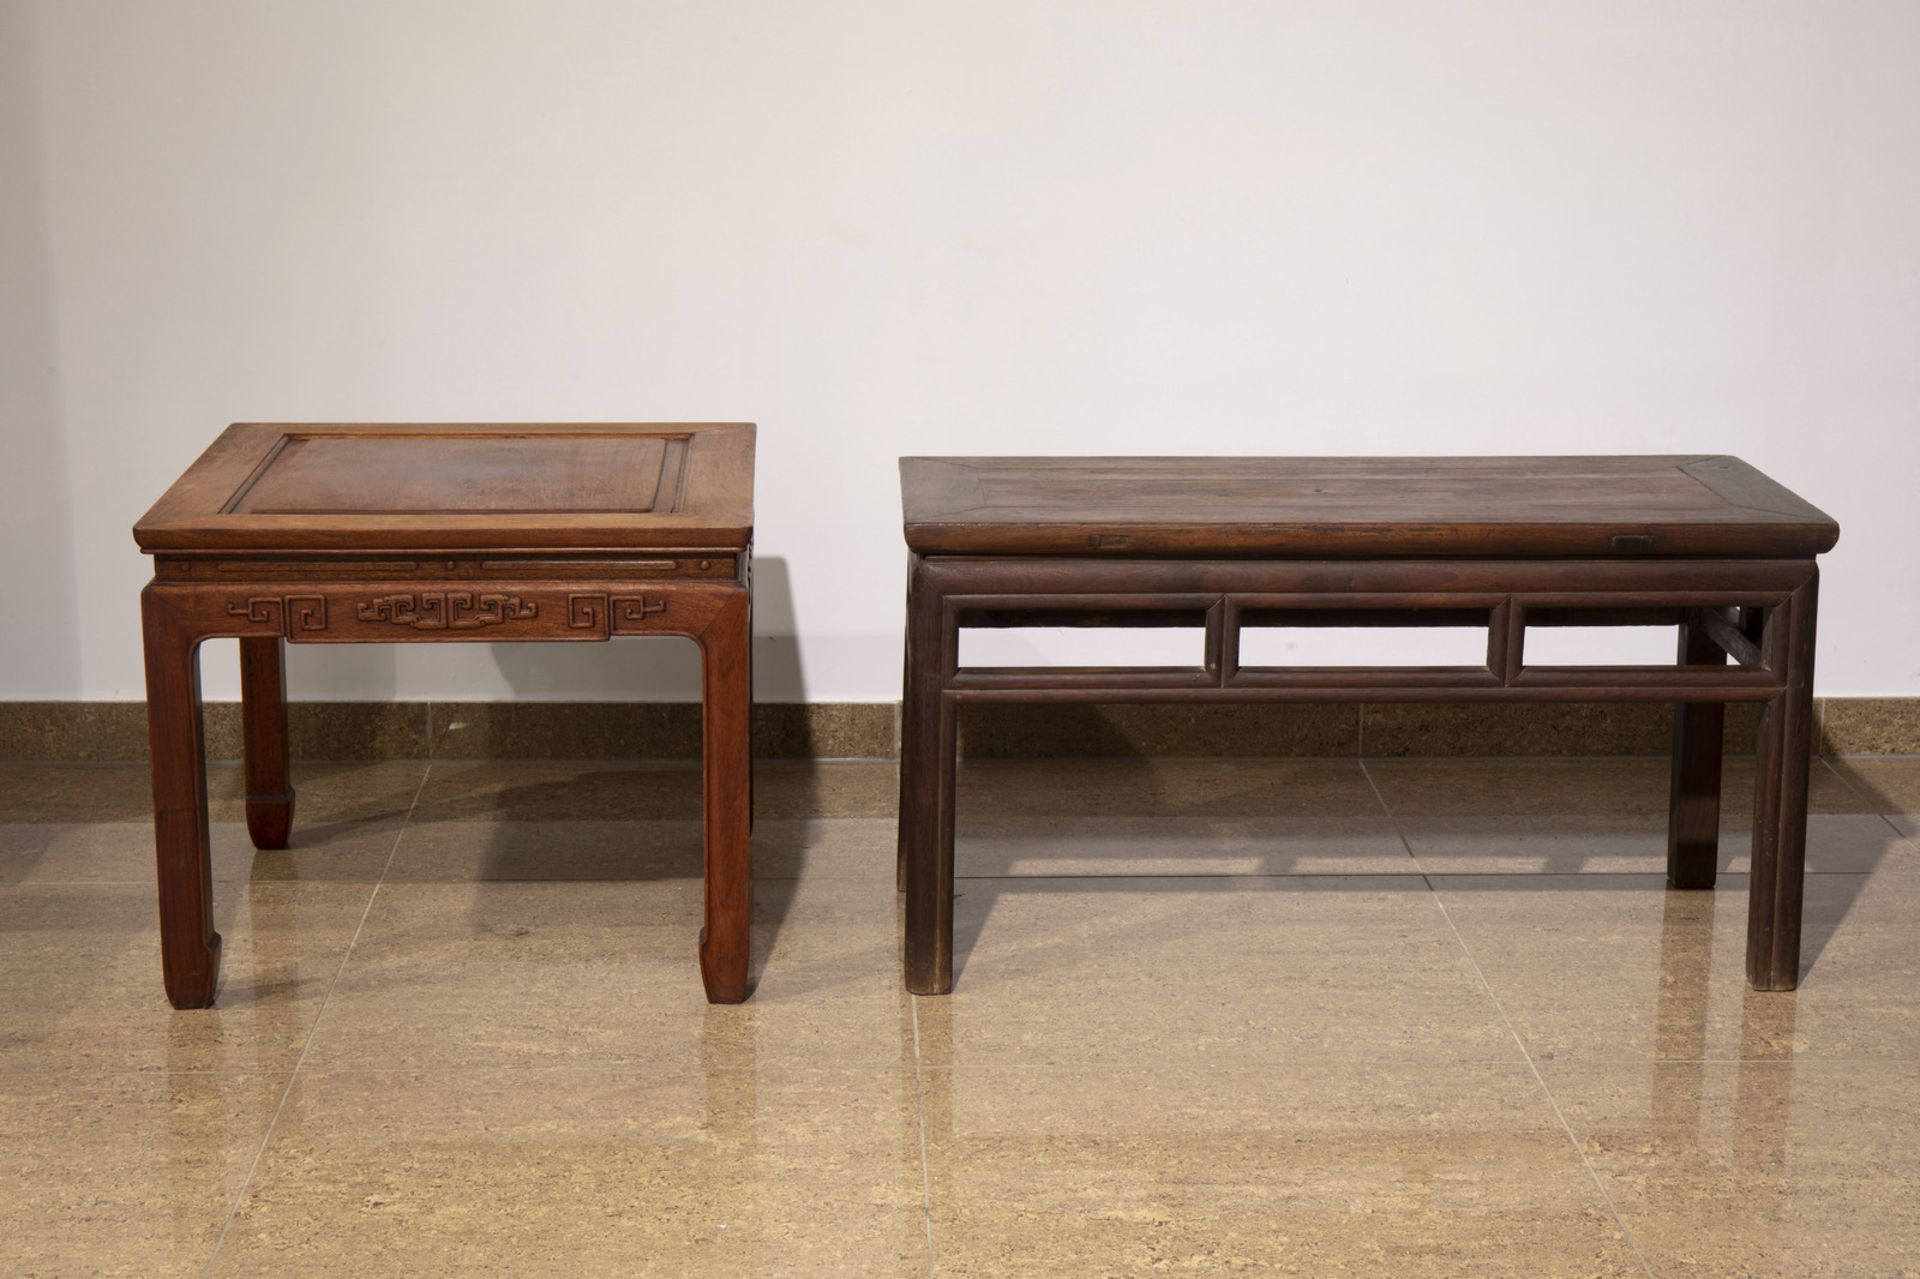 Two Chinese wooden side tables, 19th/20th C. - Image 4 of 7